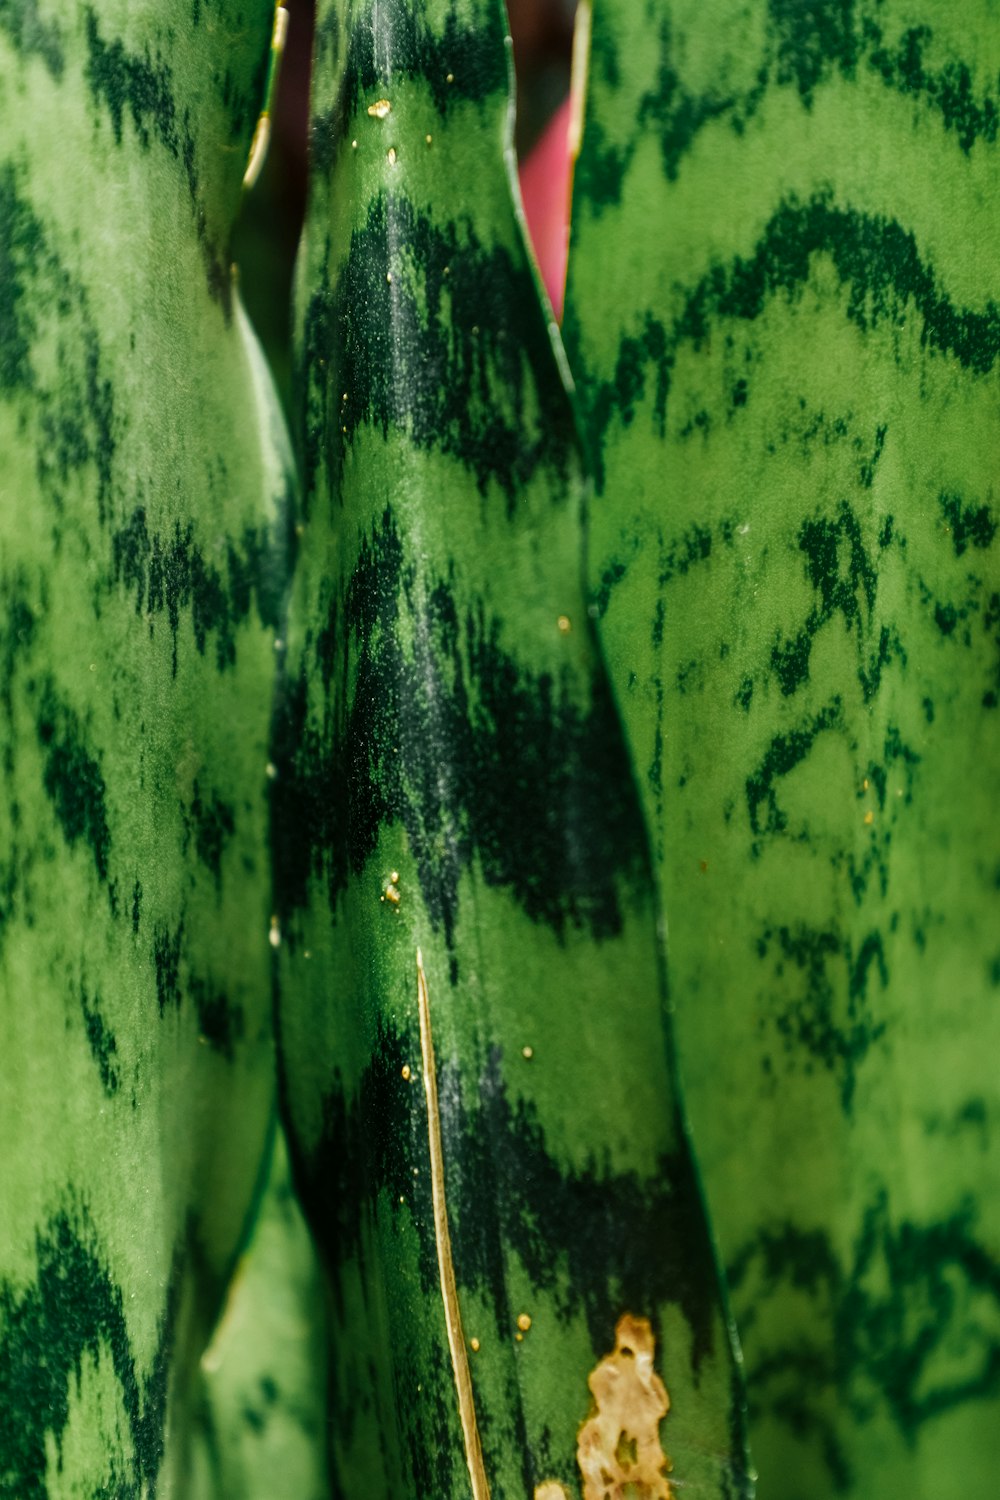 a close up of a bunch of green bananas